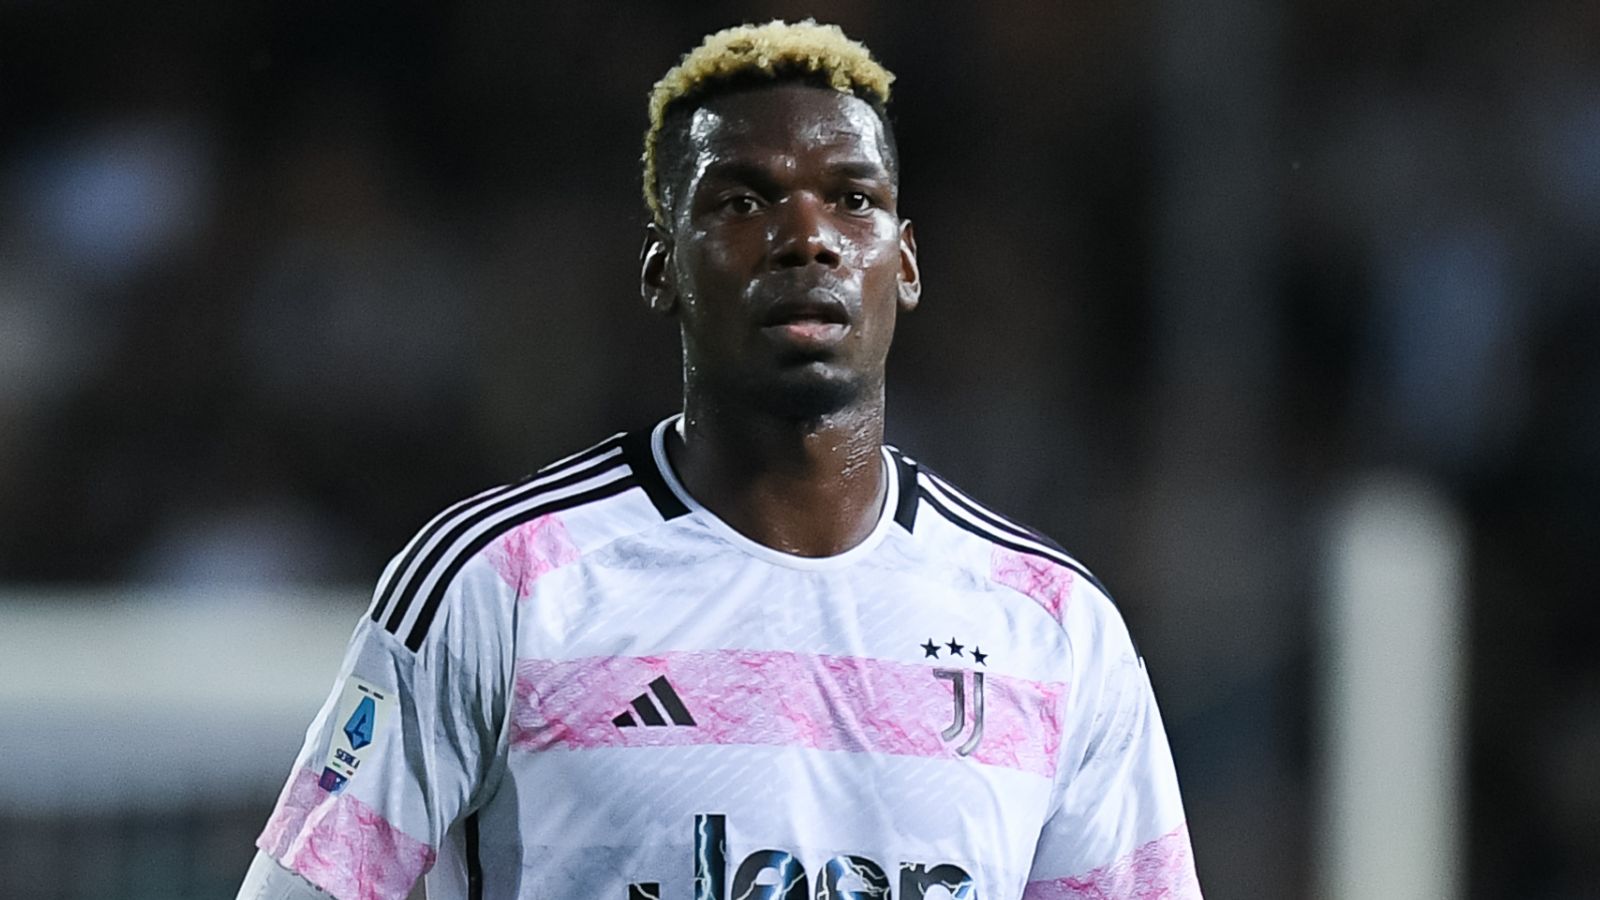 Paul Pogba: Juventus midfielder banned for four years after World Cup winner tested positive for doping | Football News